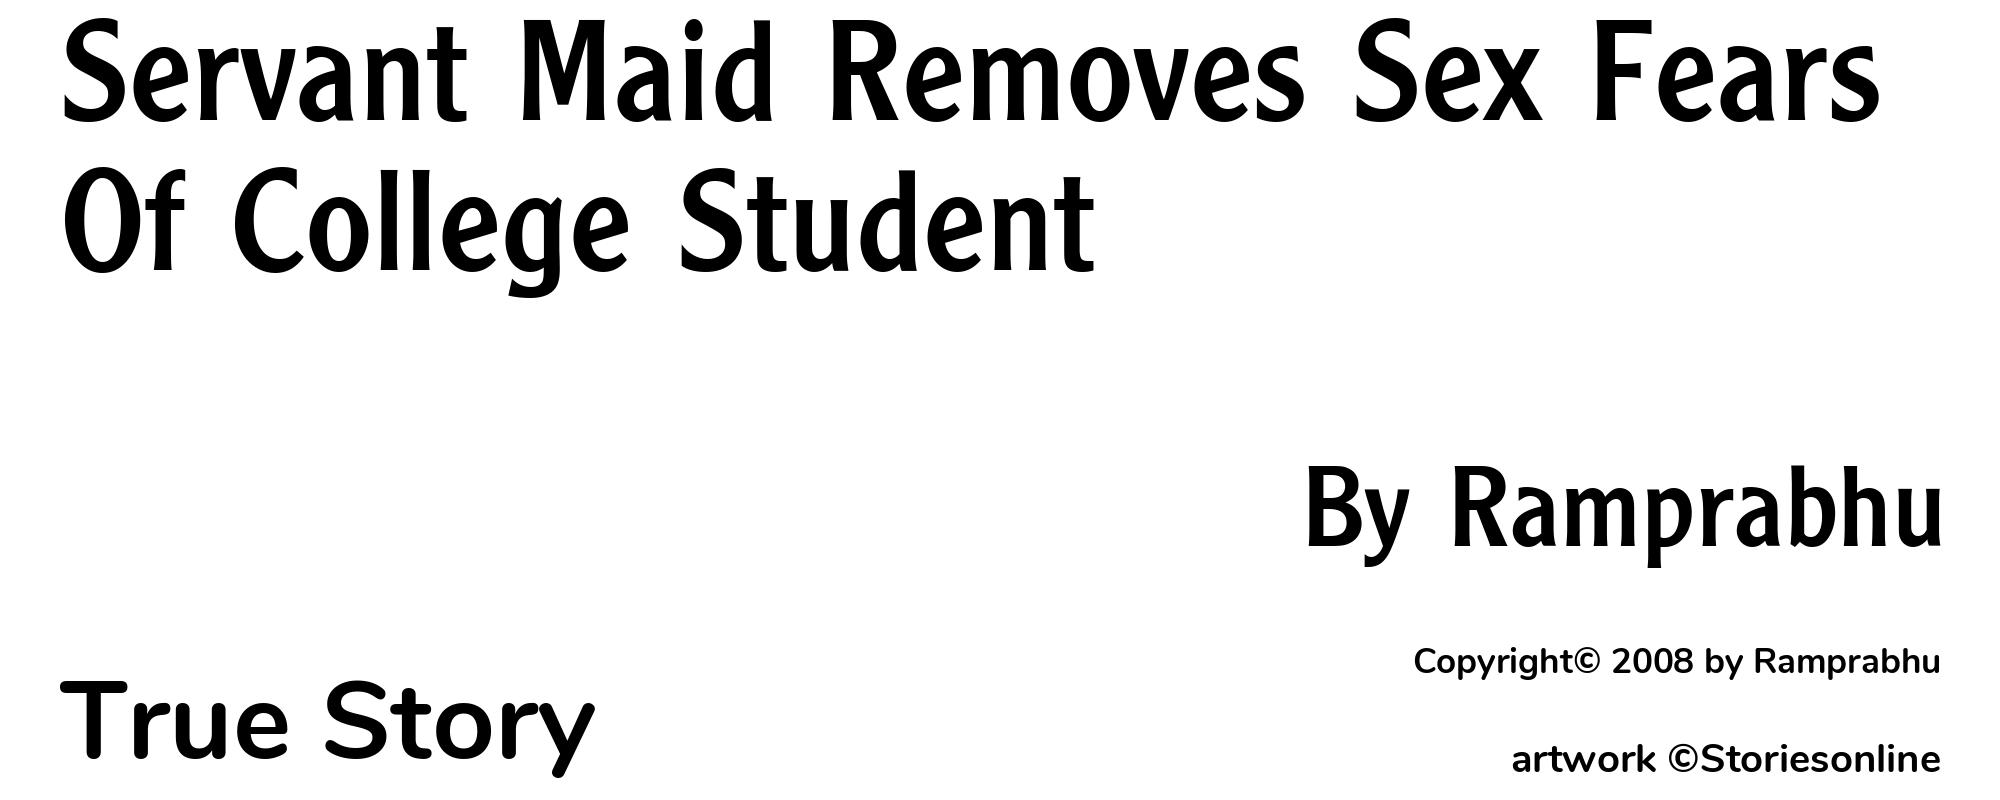 Servant Maid Removes Sex Fears Of College Student - Cover